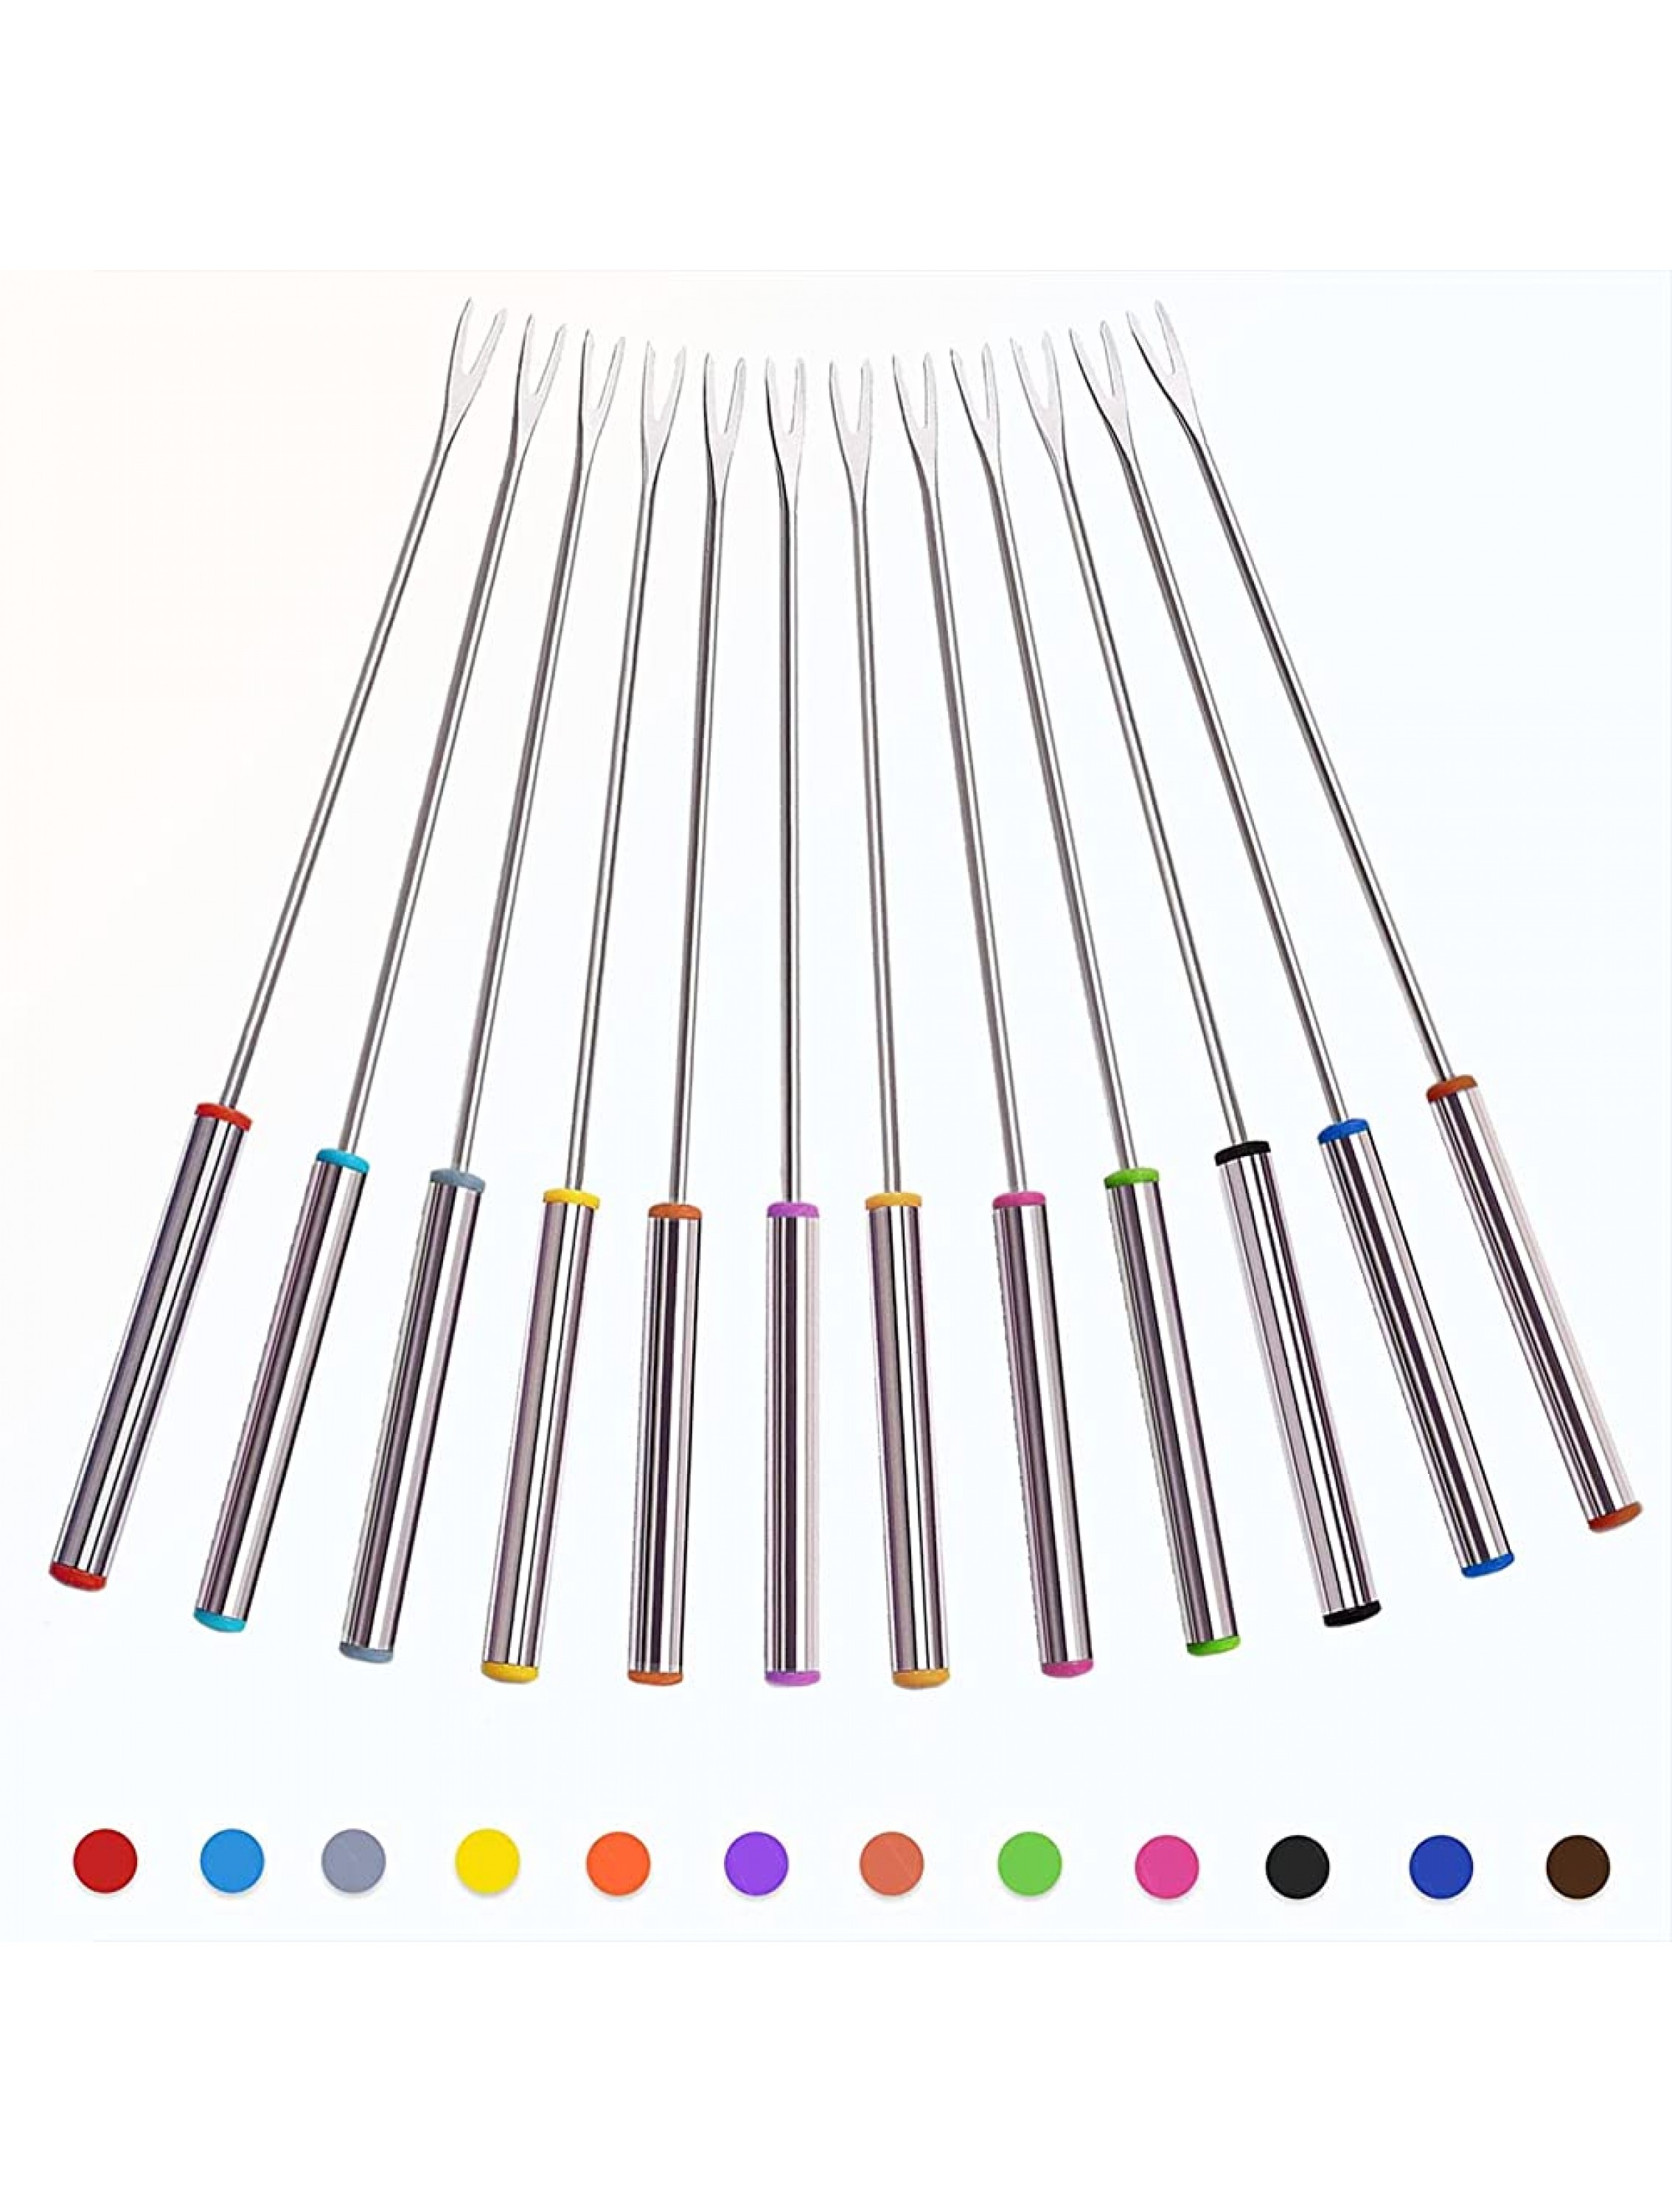 Fondue Forks Set 12 Color Coding Stainless Steel Meat Forks with Heat Resistant Handle Length 9.5 inch - BZ5FP6G78